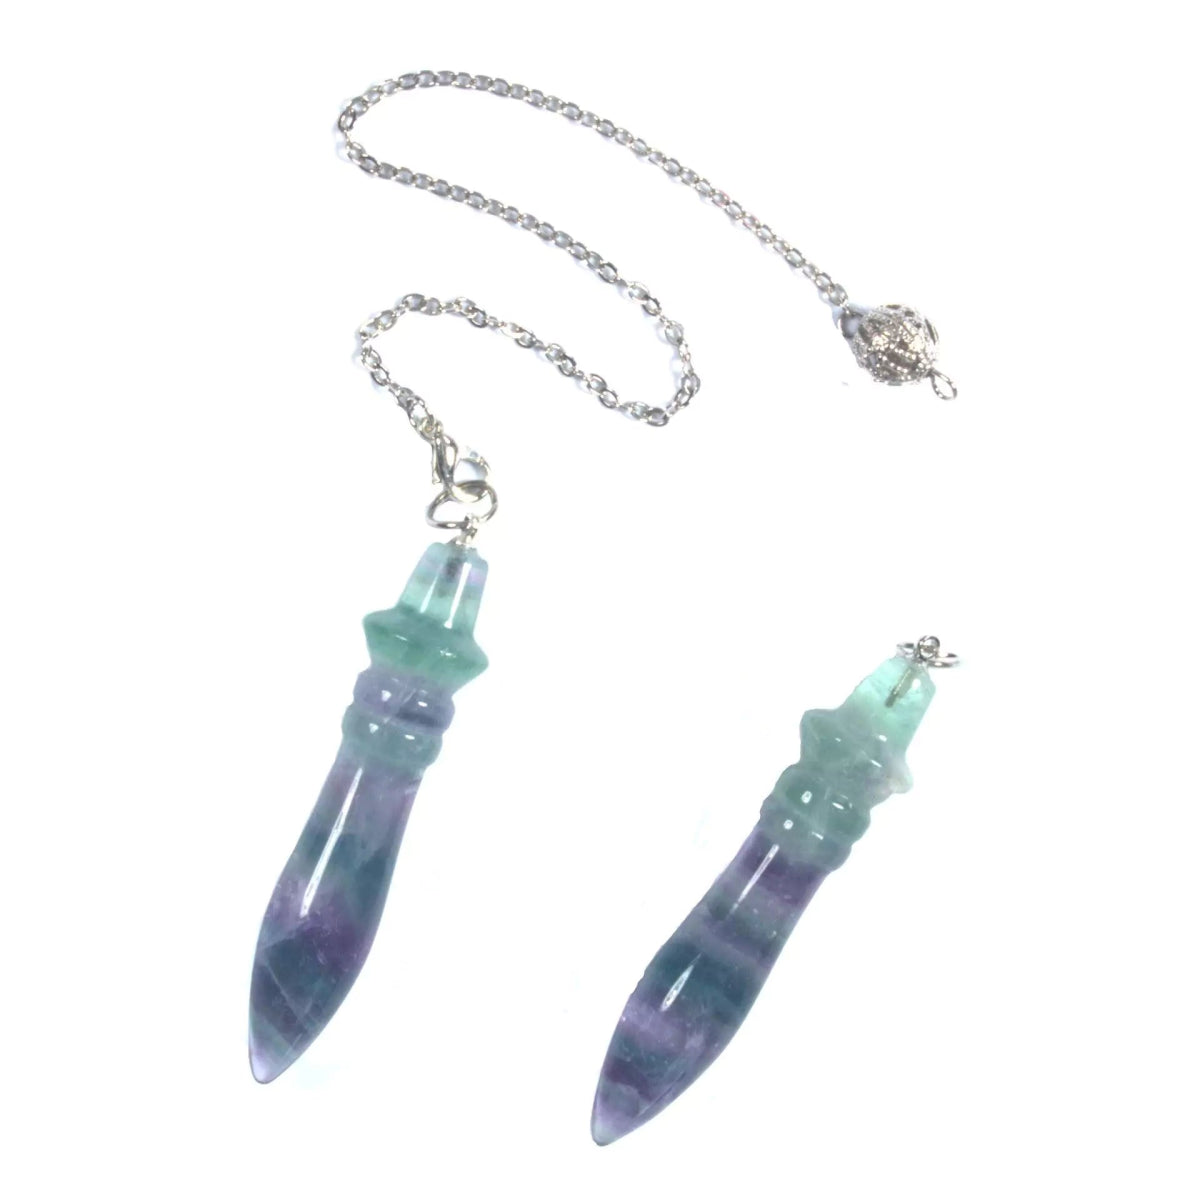 7 Chakra Fluorite Pendulum - Natural Crystal for Divination and Energy Healing - HigherFrequencies